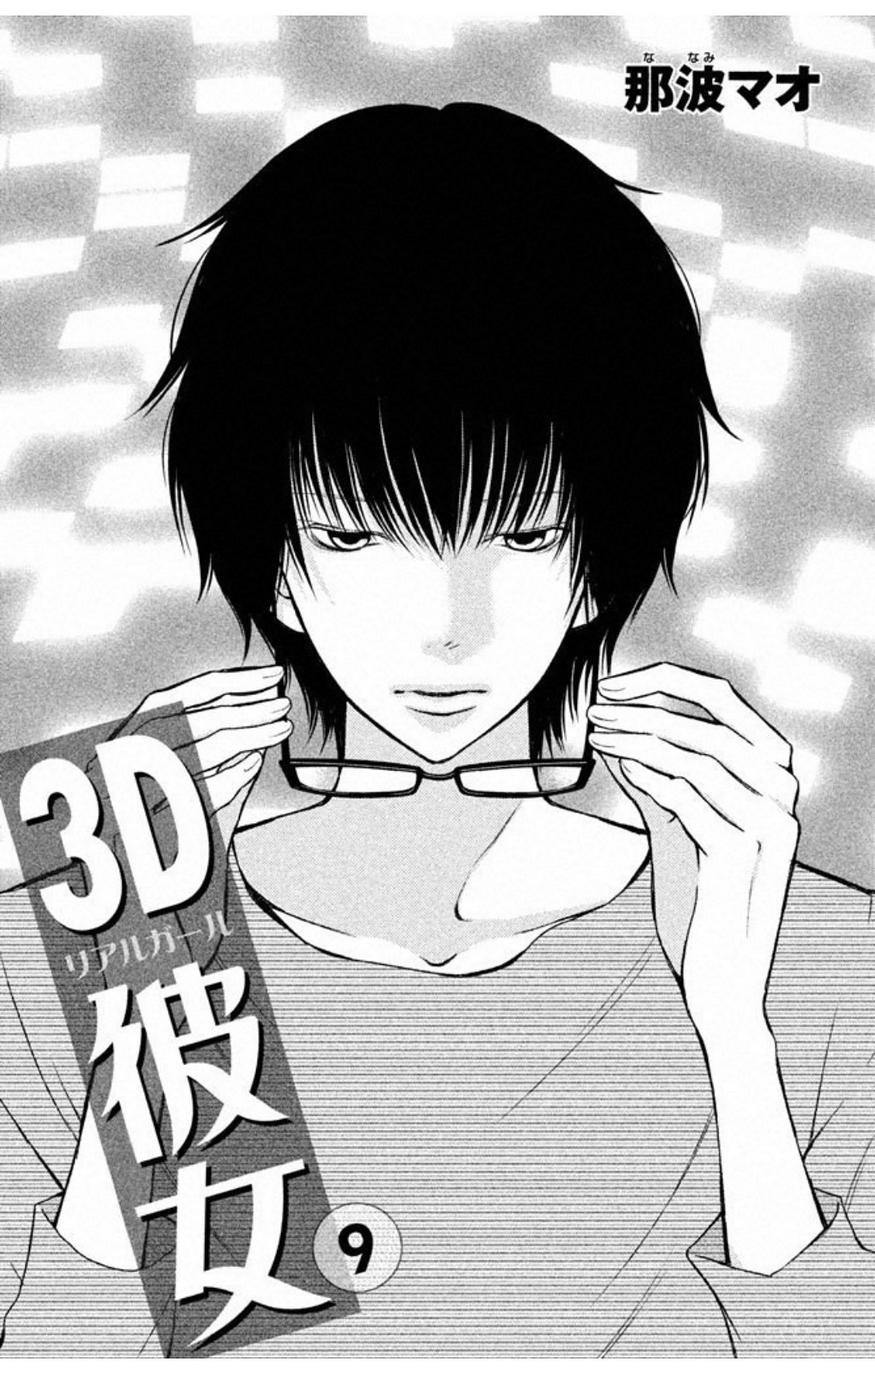 3D Kanojo - Chapter 32 - Page 2